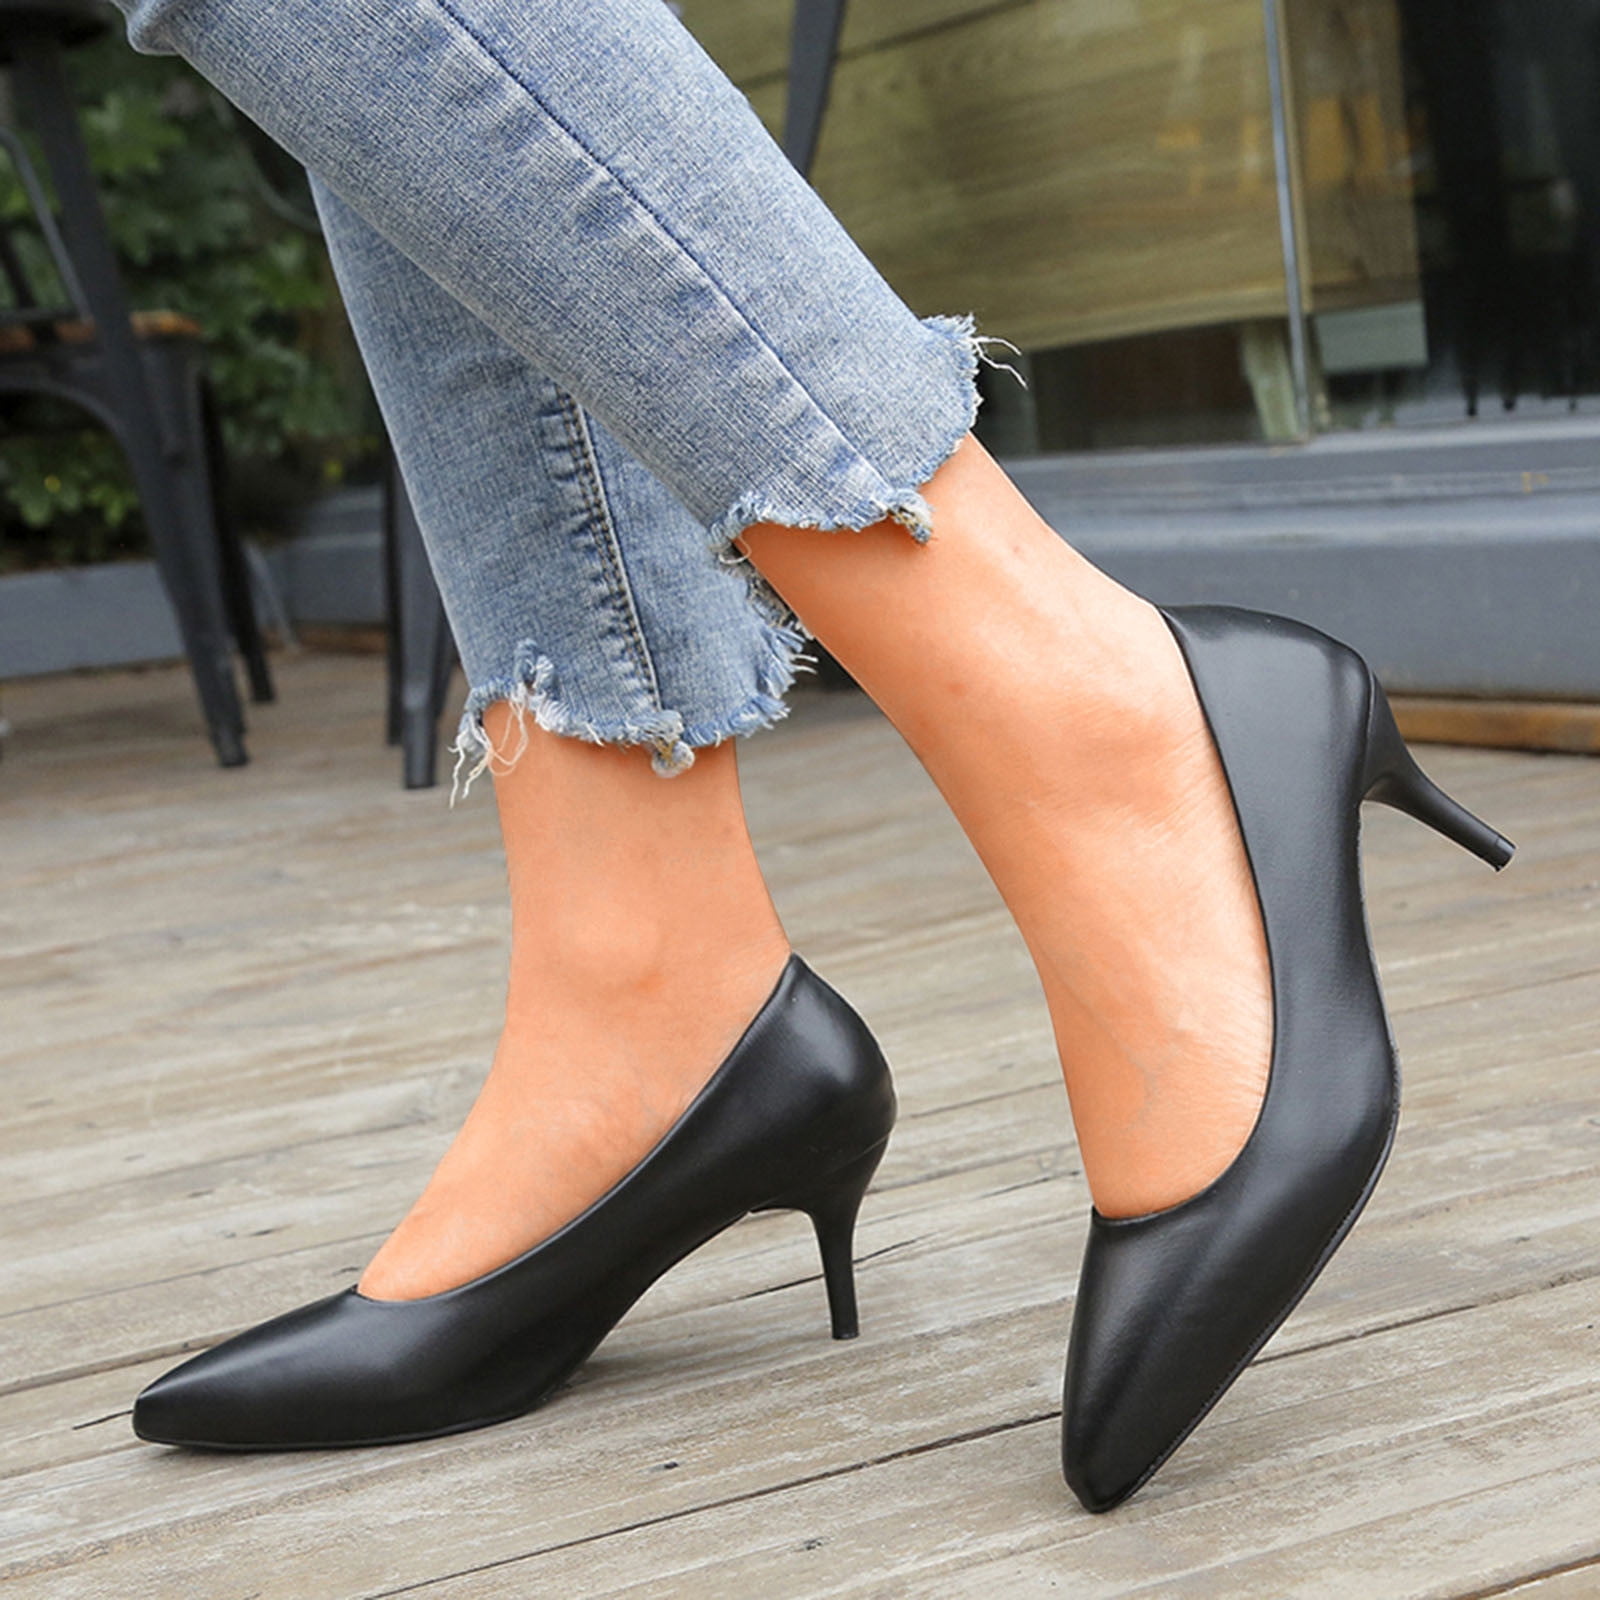 OFFICE On To Point Courts Black Patent - High Heels